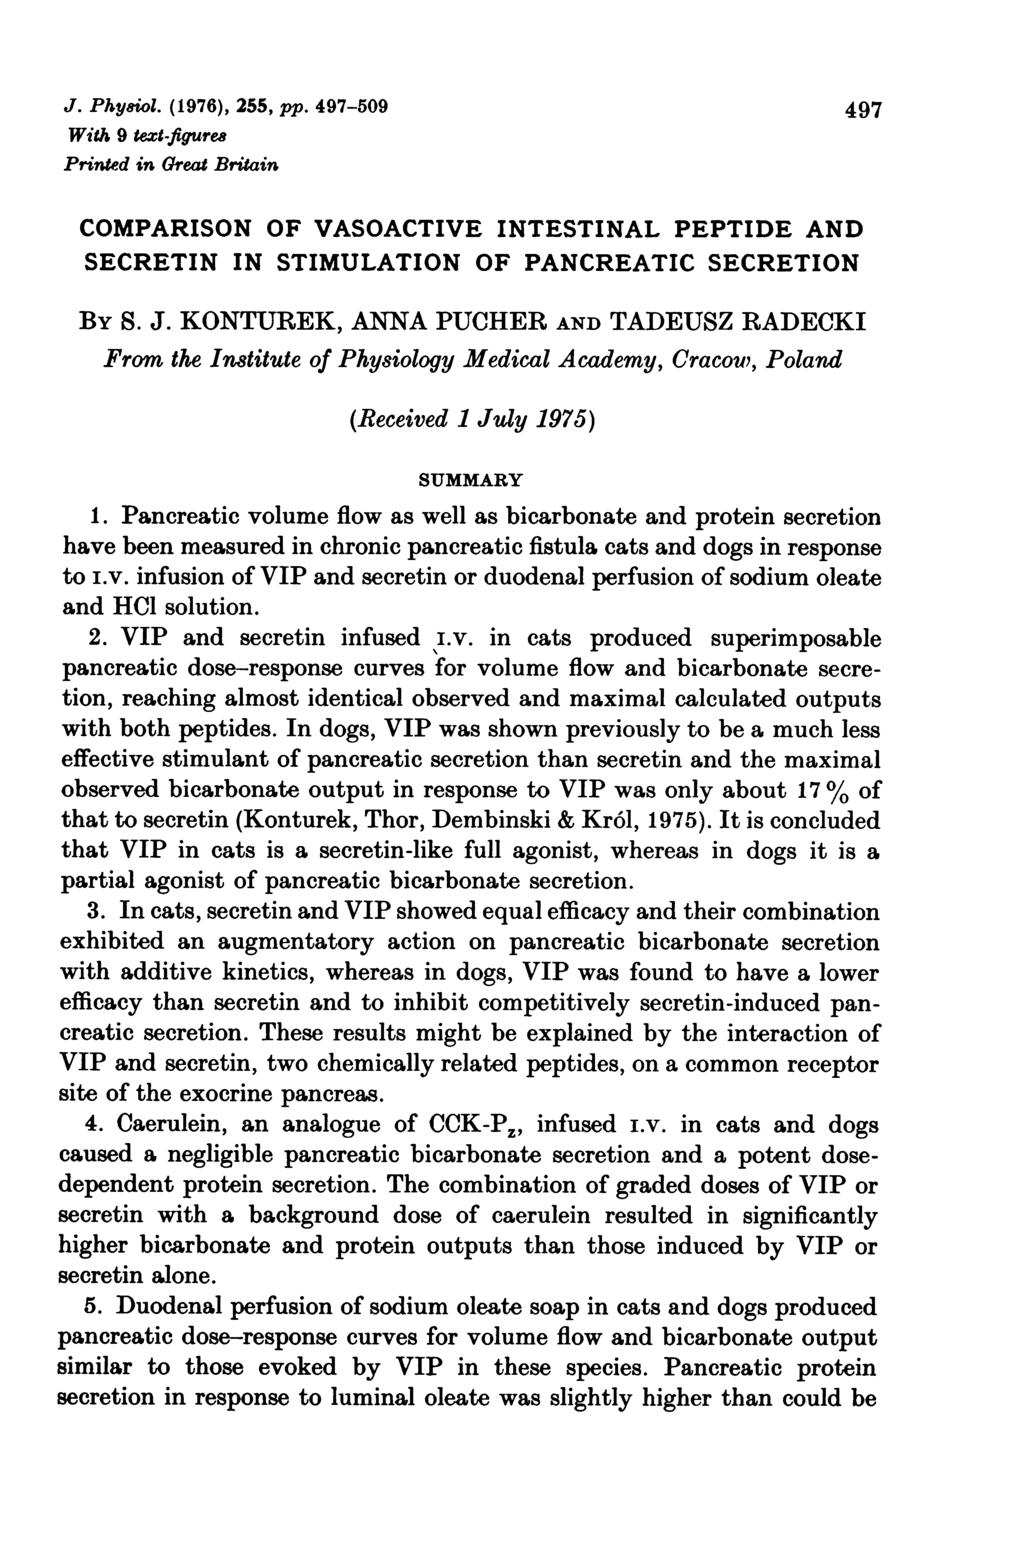 J. Phyeiol. (1976), 255, pp. 497-509 497 With 9 text-ftgureg Printed in Great Britain COMPARSON OF VASOACTV NTSTNAL PPTD AND SCRTN N STMULATON OF PANCRATC SCRTON BY S. J.